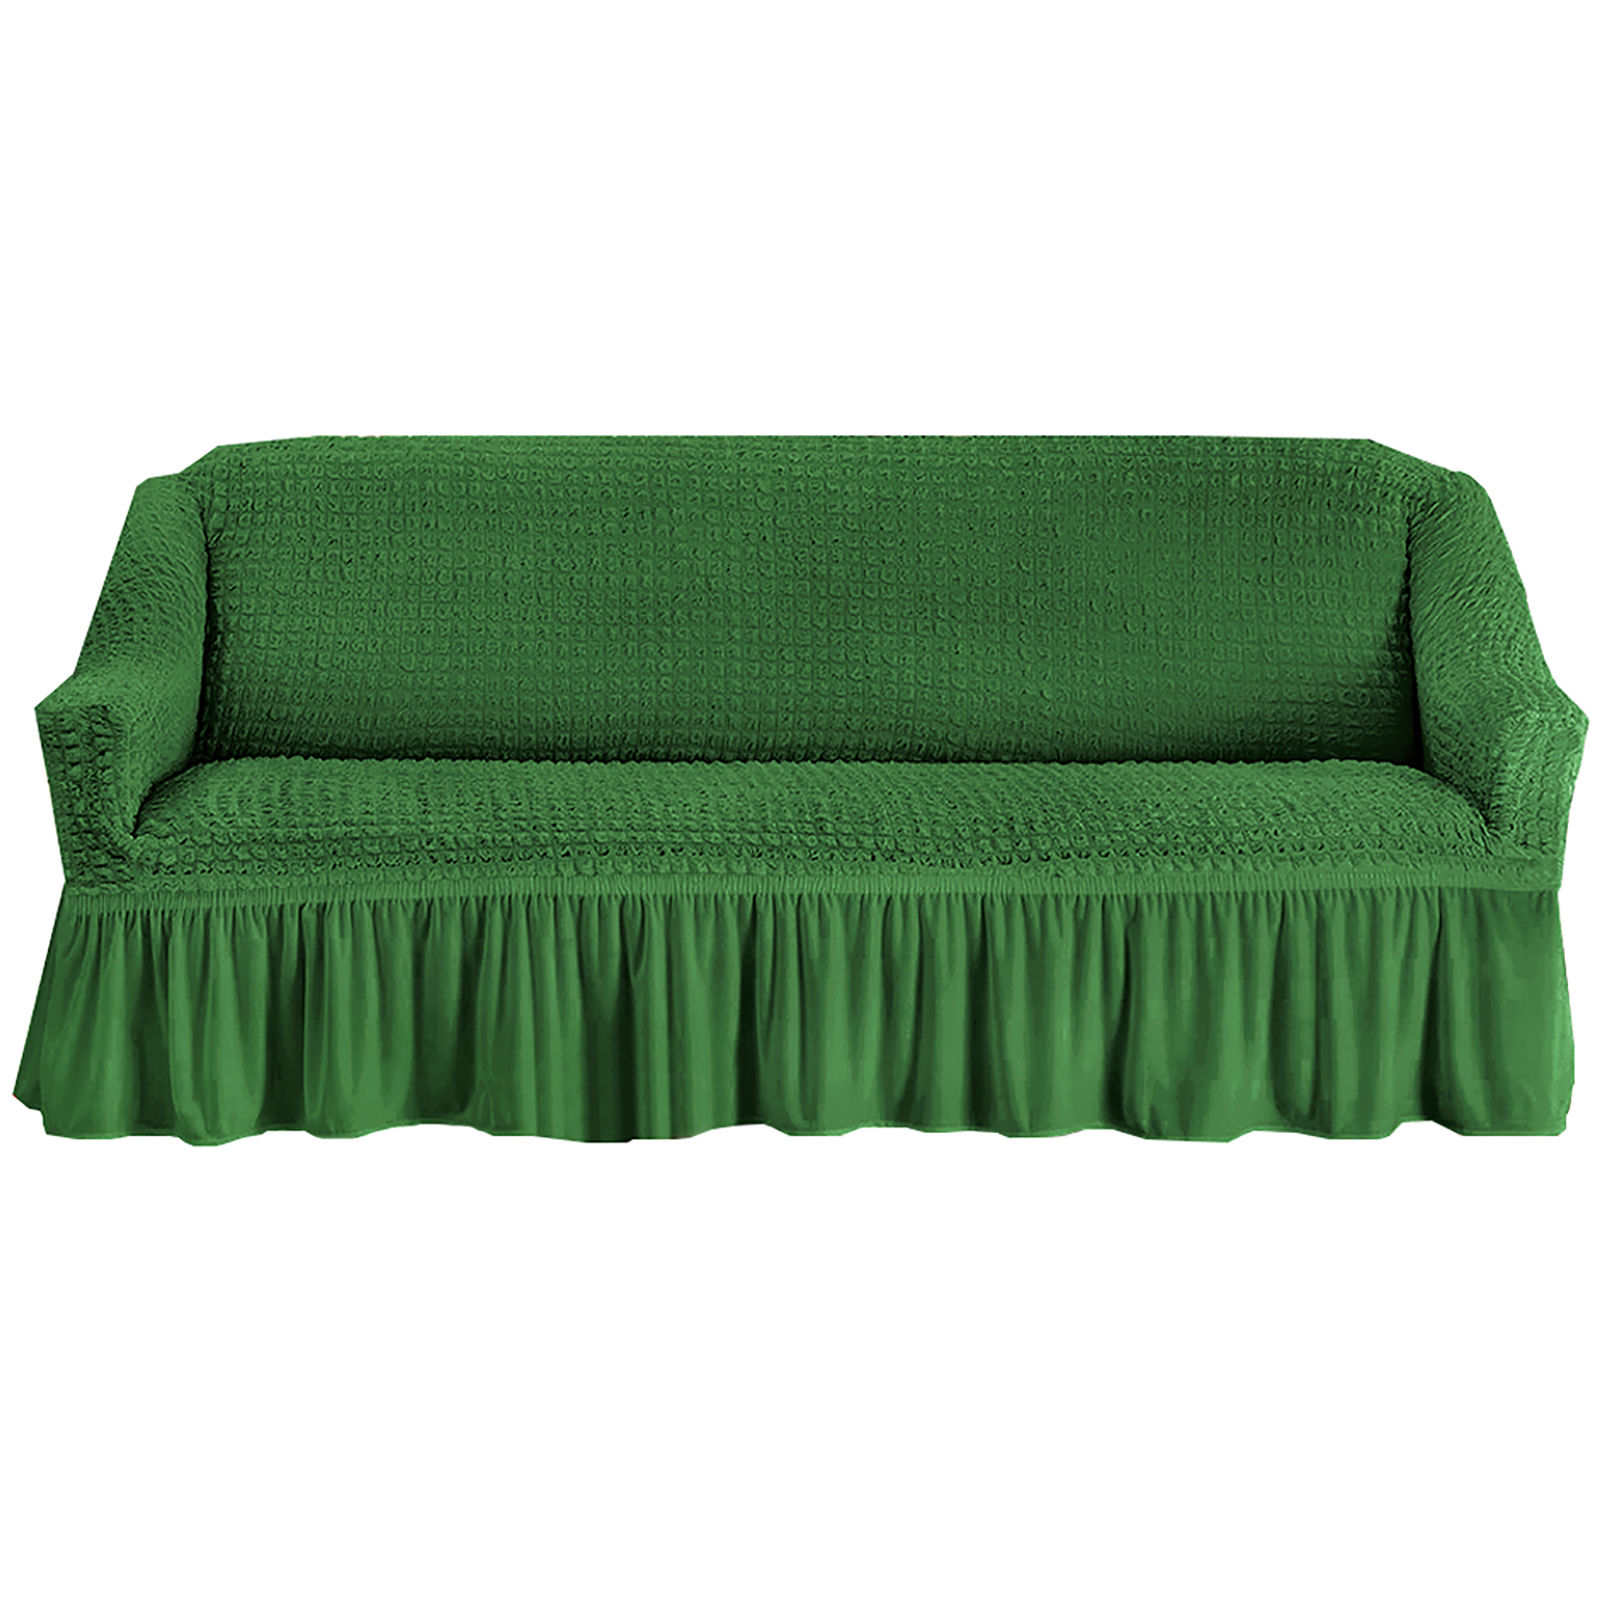 Stretch Sofa Slipcover, 3 Seater Sofa Slipcovers With Skirt With Armless Soft Sofa Cover Elastic Straps Sofa Slipcover For Living Room Kids Pets-Green A-X-Large